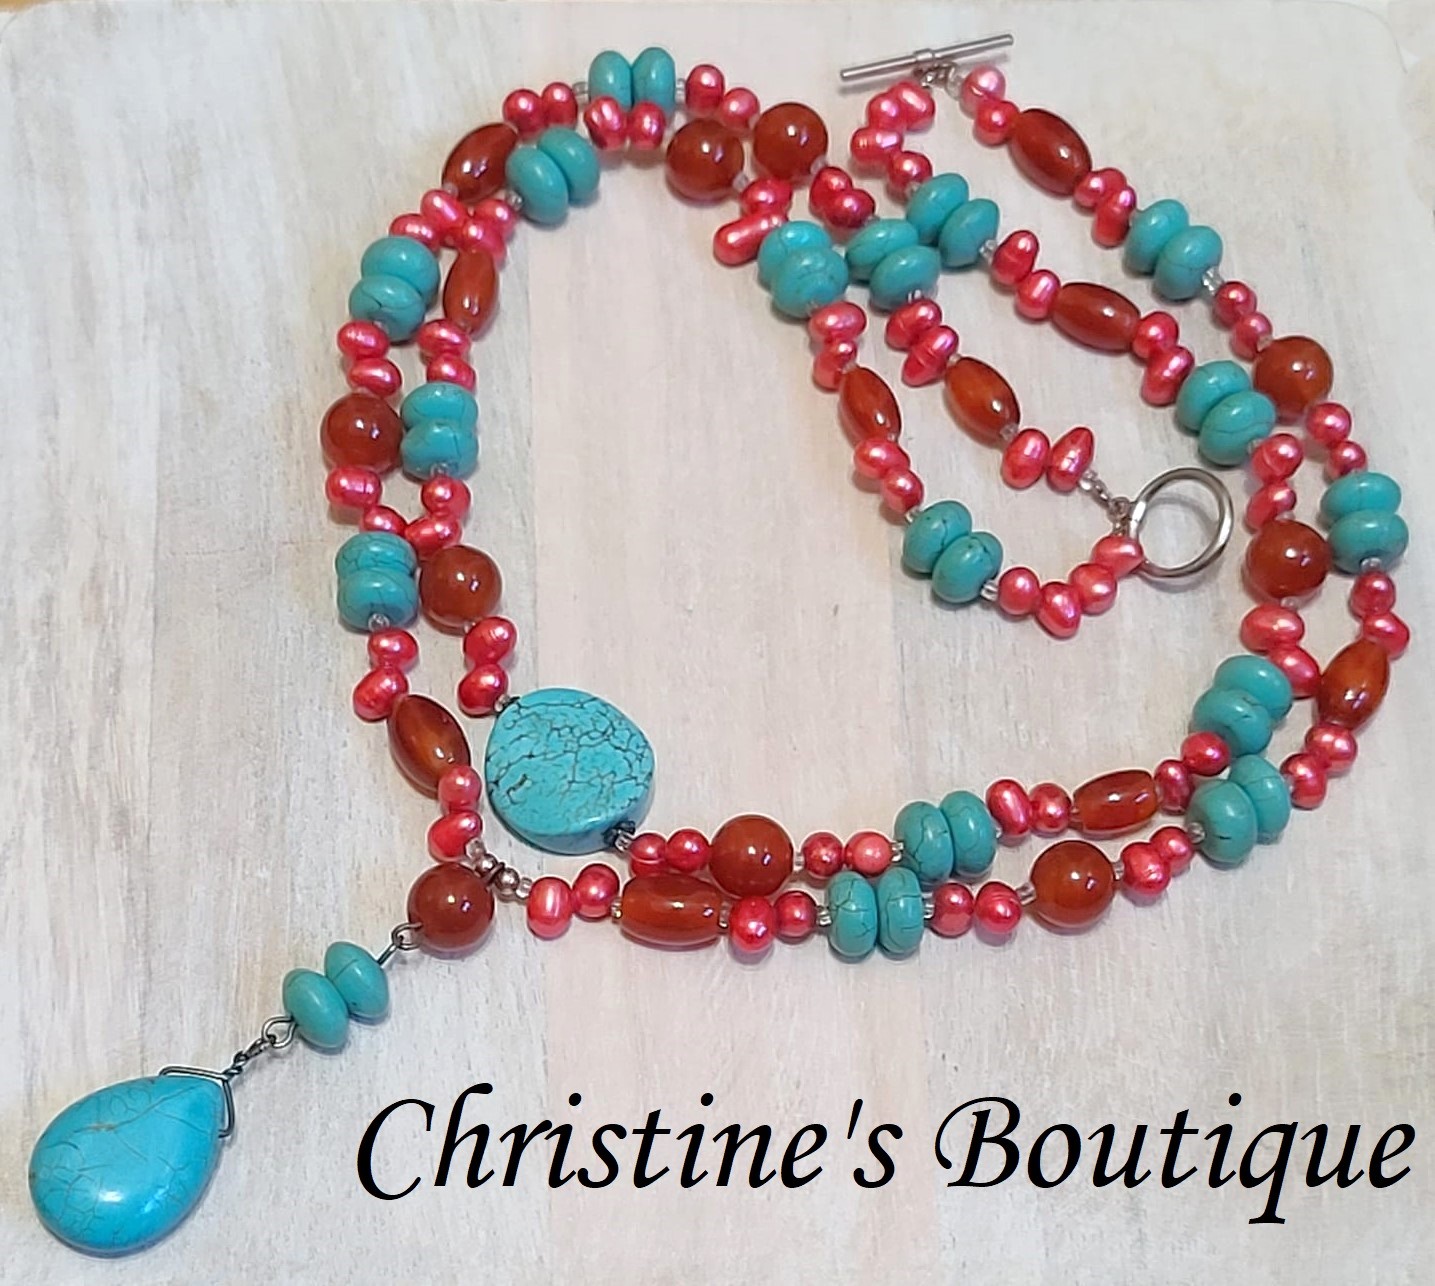 Red Agate & Turquoise Gemstone & Pearl 2 Strand Necklace